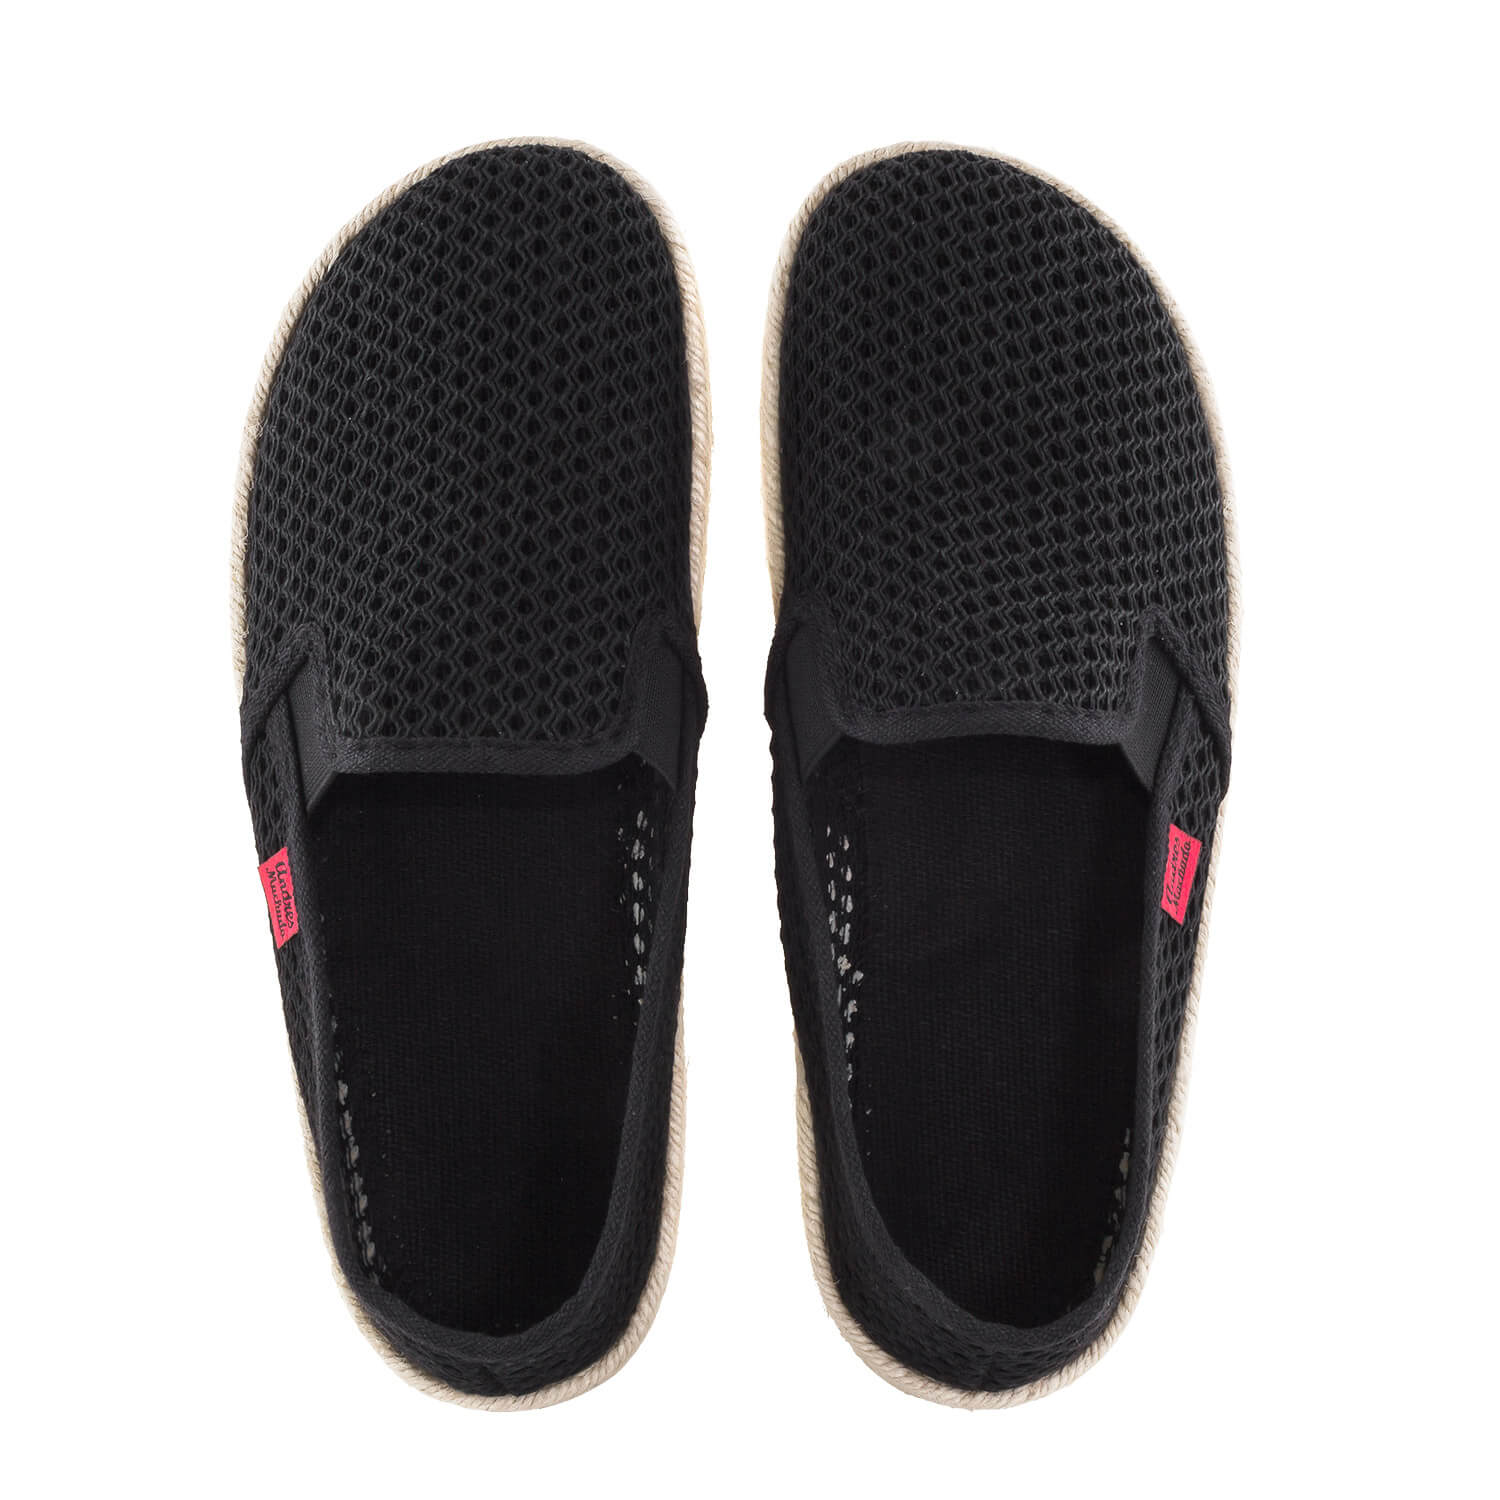 Slip-On Fabric Shoes in Black Mesh with Jute and Rubber Sole 